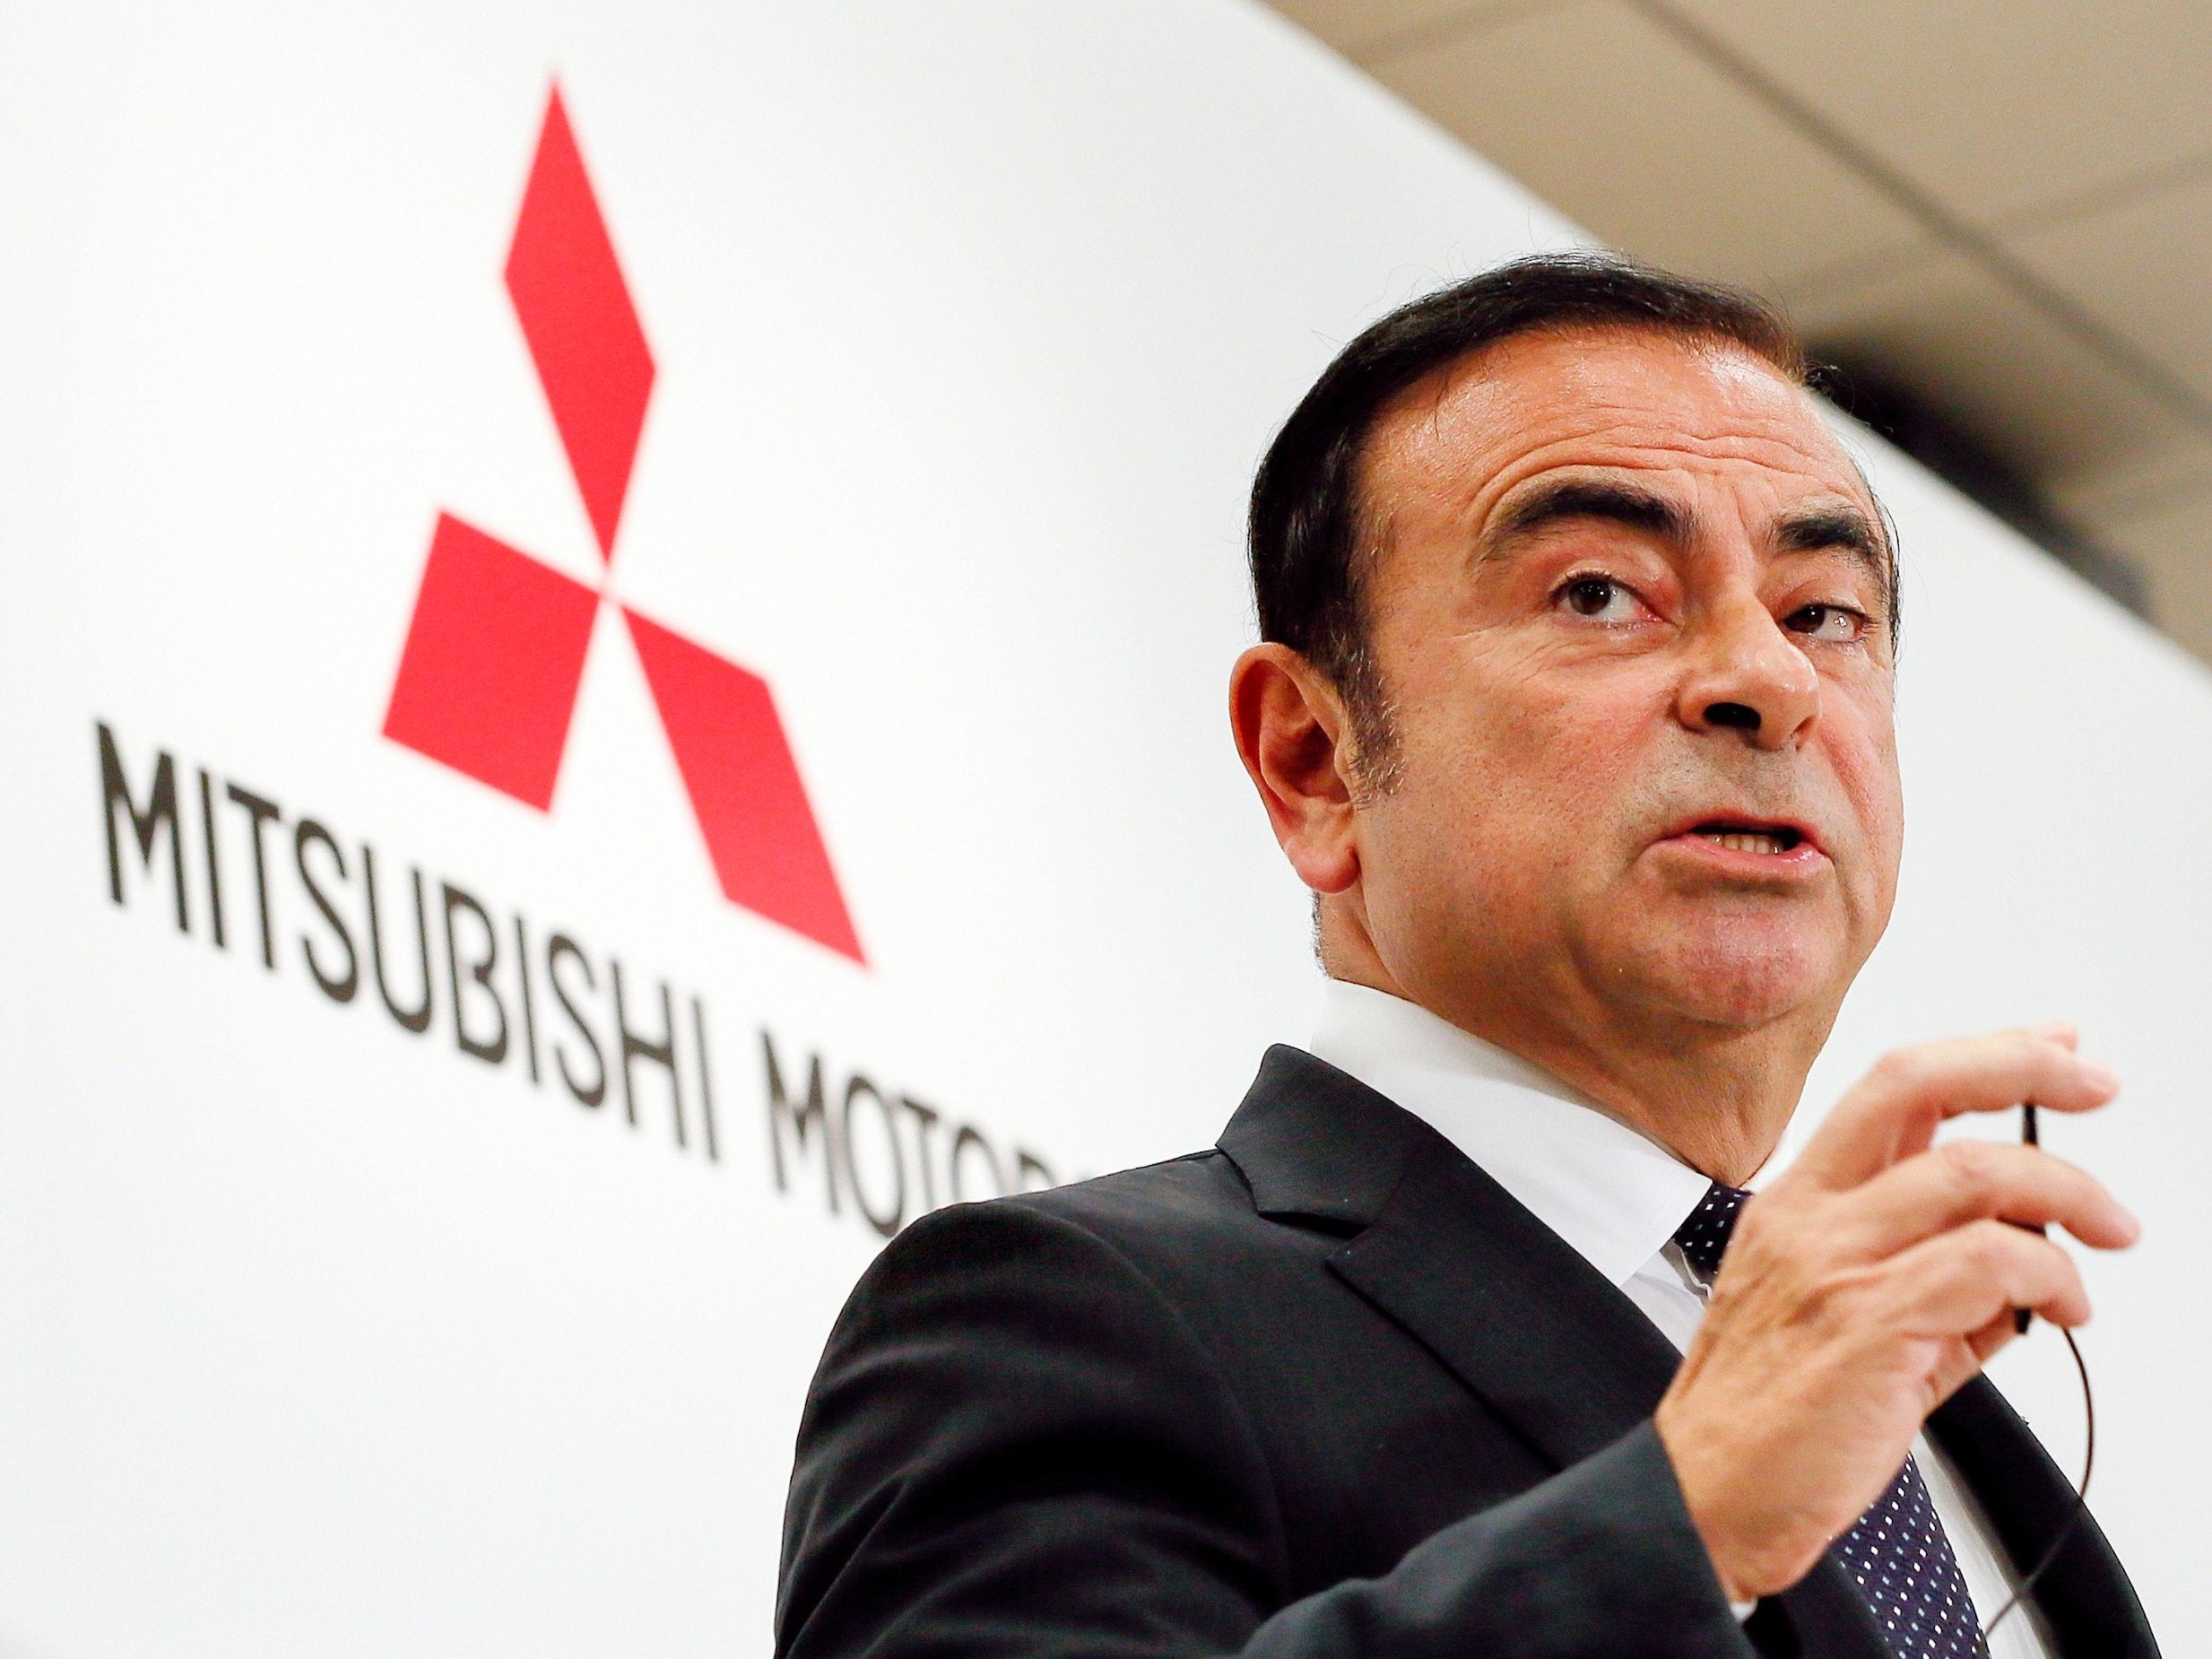 Former Nissan chairman Carlos Ghosn faces new breach-of-trust allegations